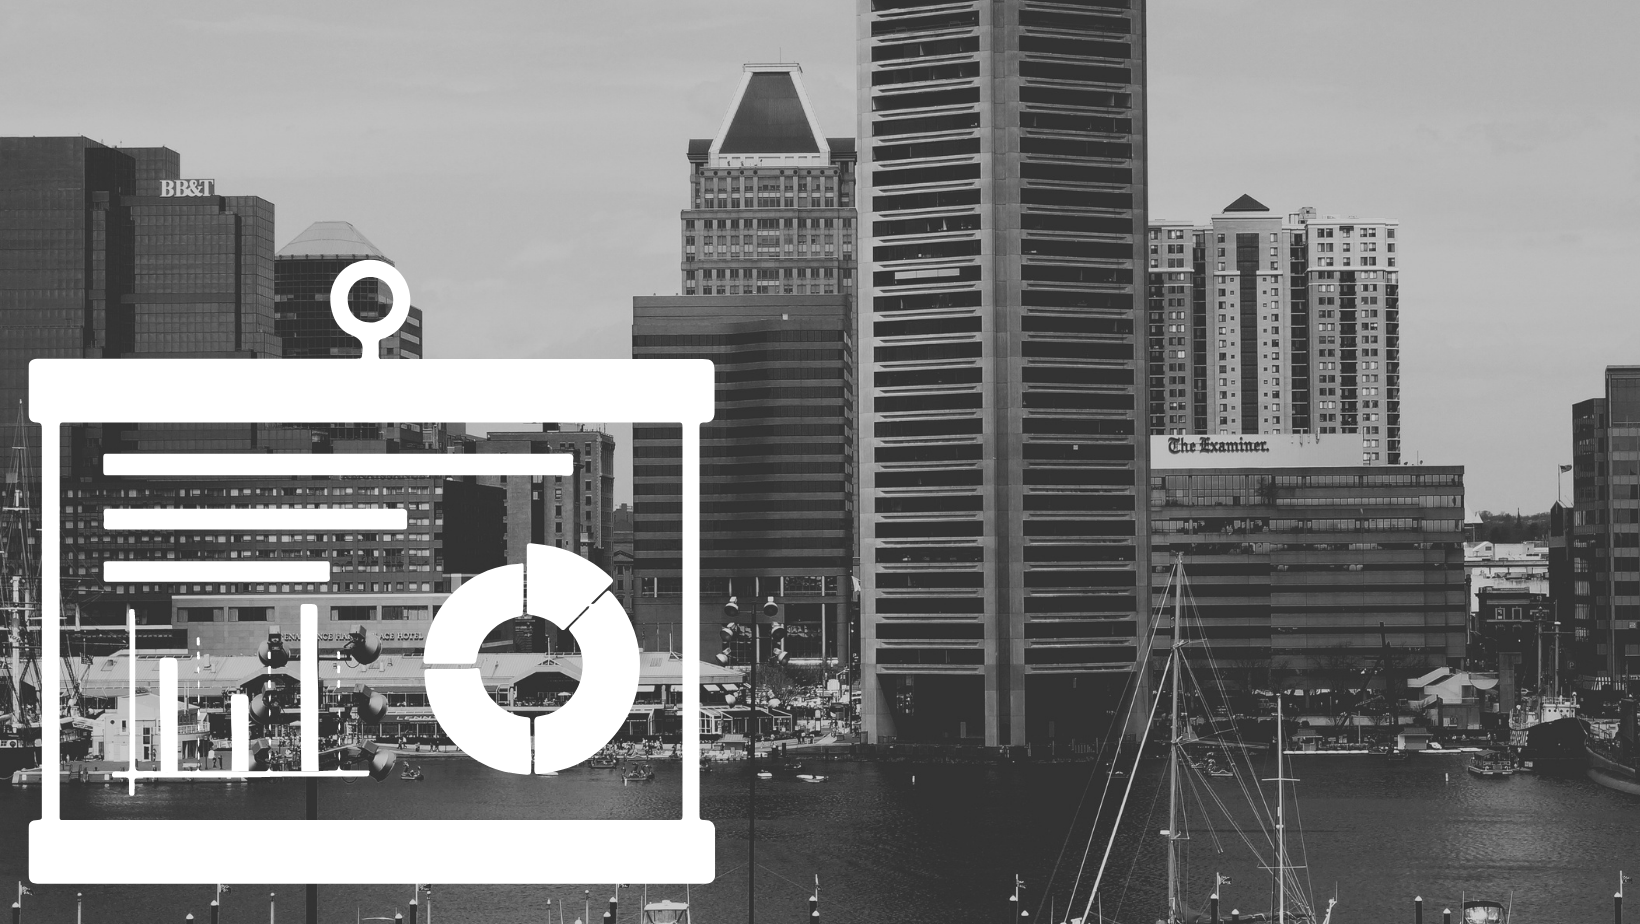 A photo of Baltimore City with a graph icon